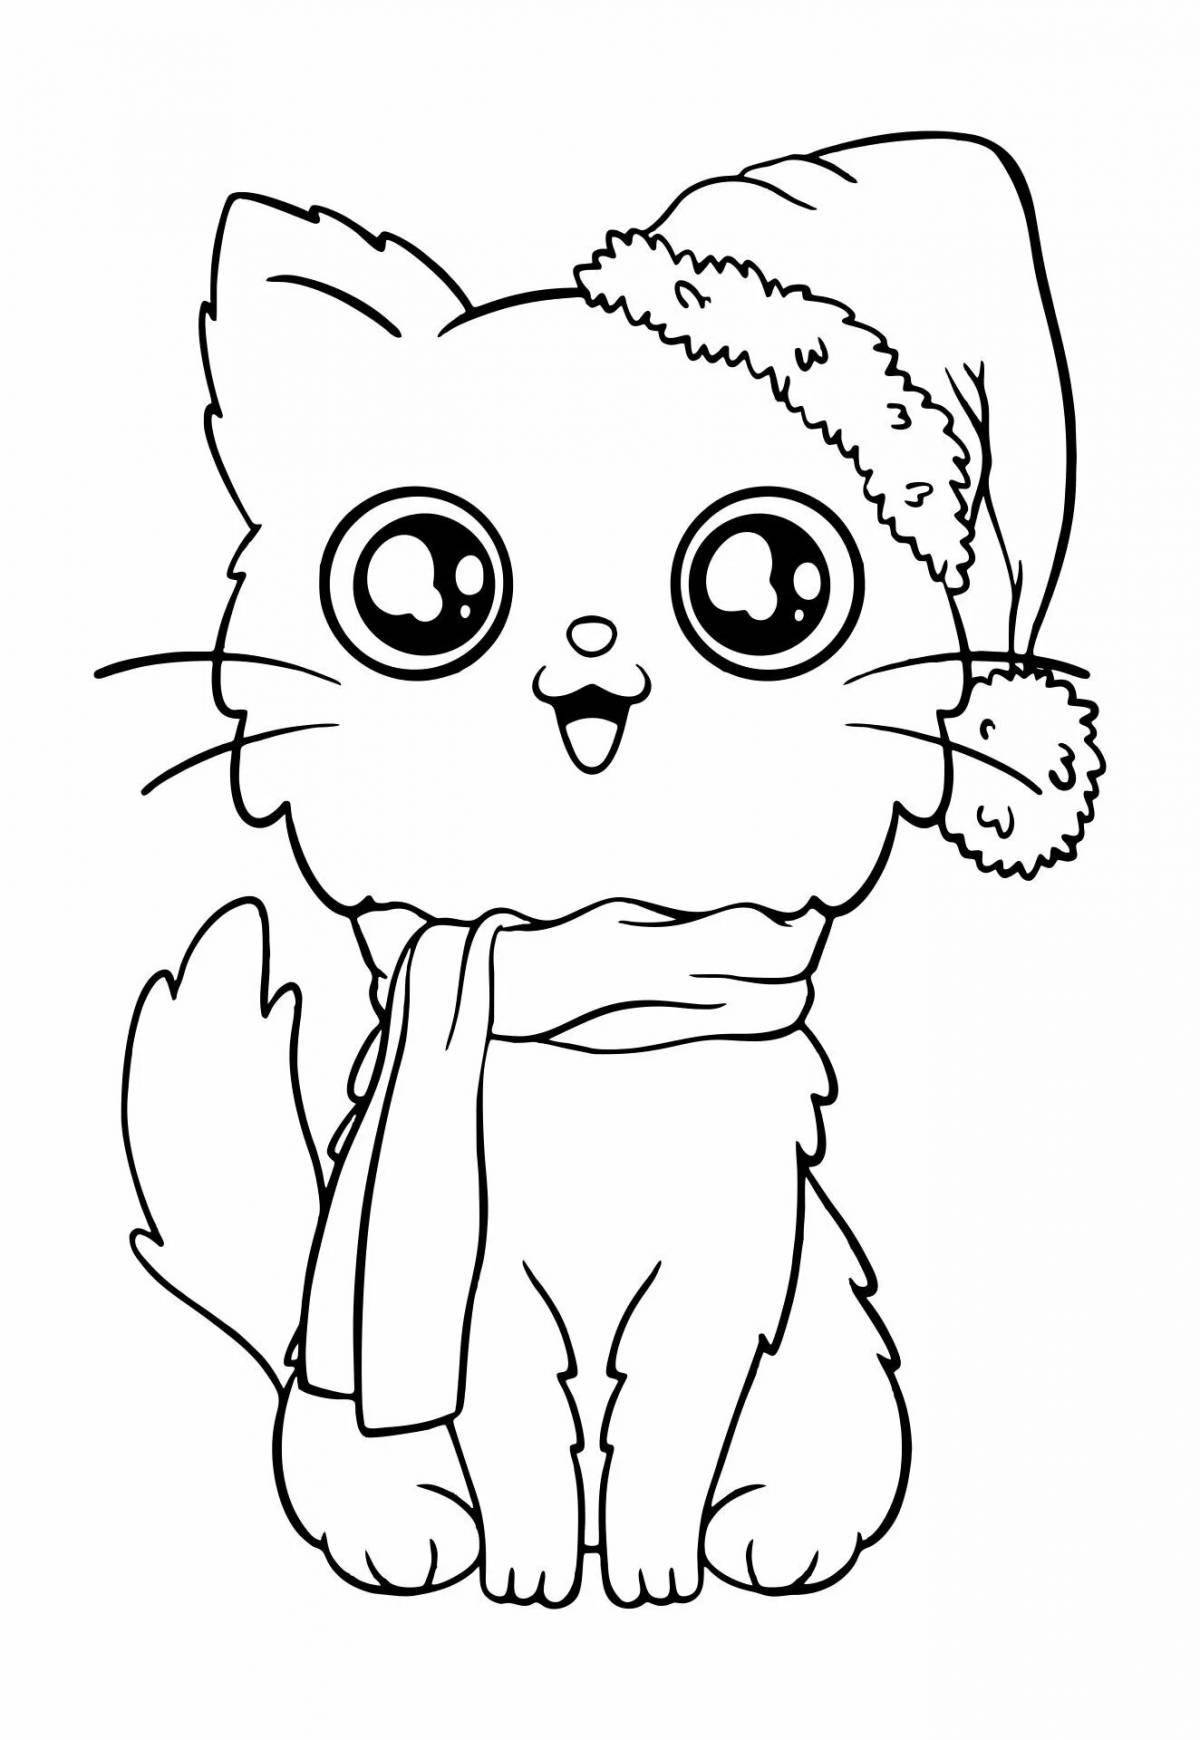 Coloring book luxury Christmas cat